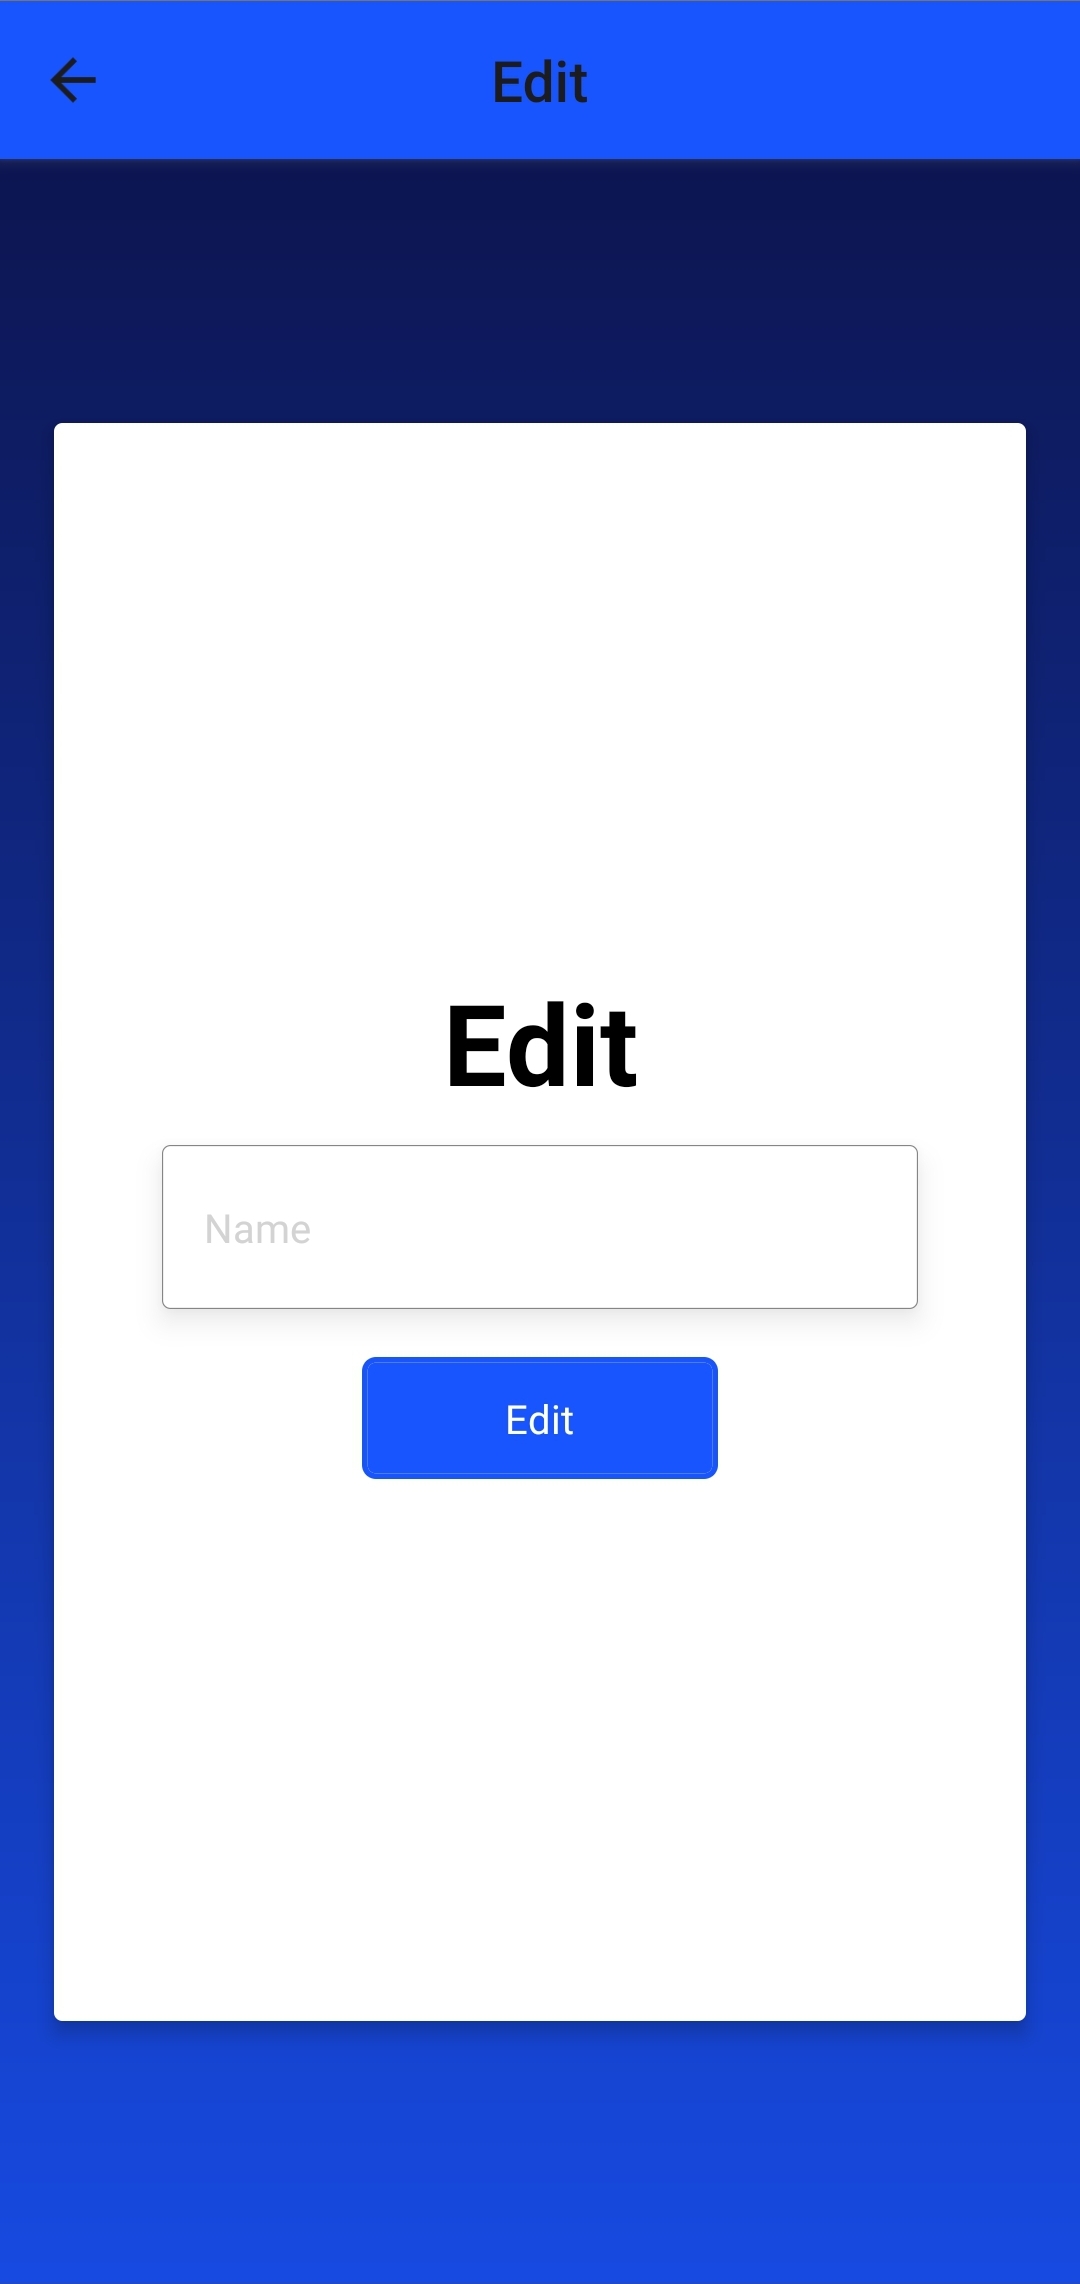 A screenshot of a mobile device running the demo tru.ID application. The background is blue with a white card over the top. On this card is the label 'Edit'. There is also a text input field with the placeholder 'name' and a blue button with the white text 'Edit'.